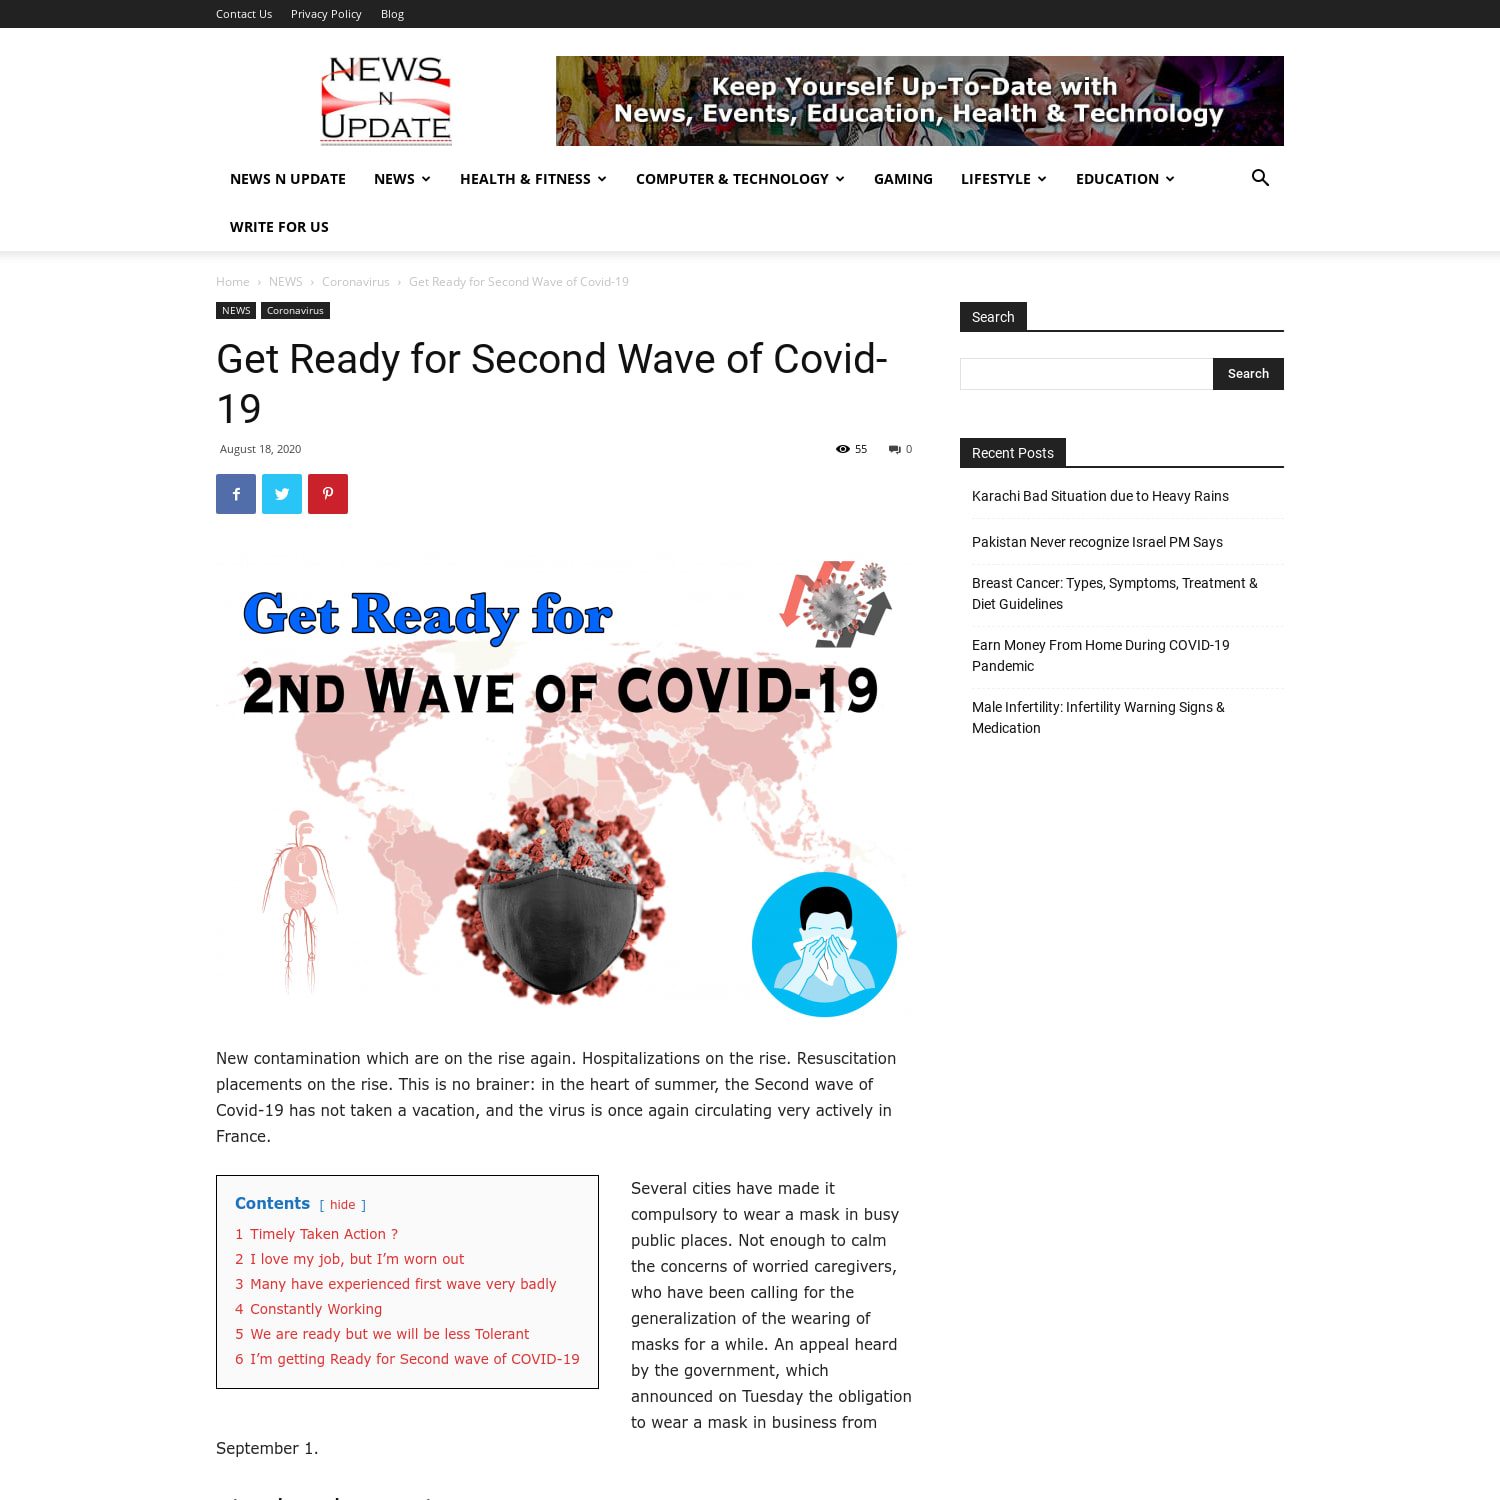 Get Ready for Second Wave of Covid-19, it'll Hit Badly Again